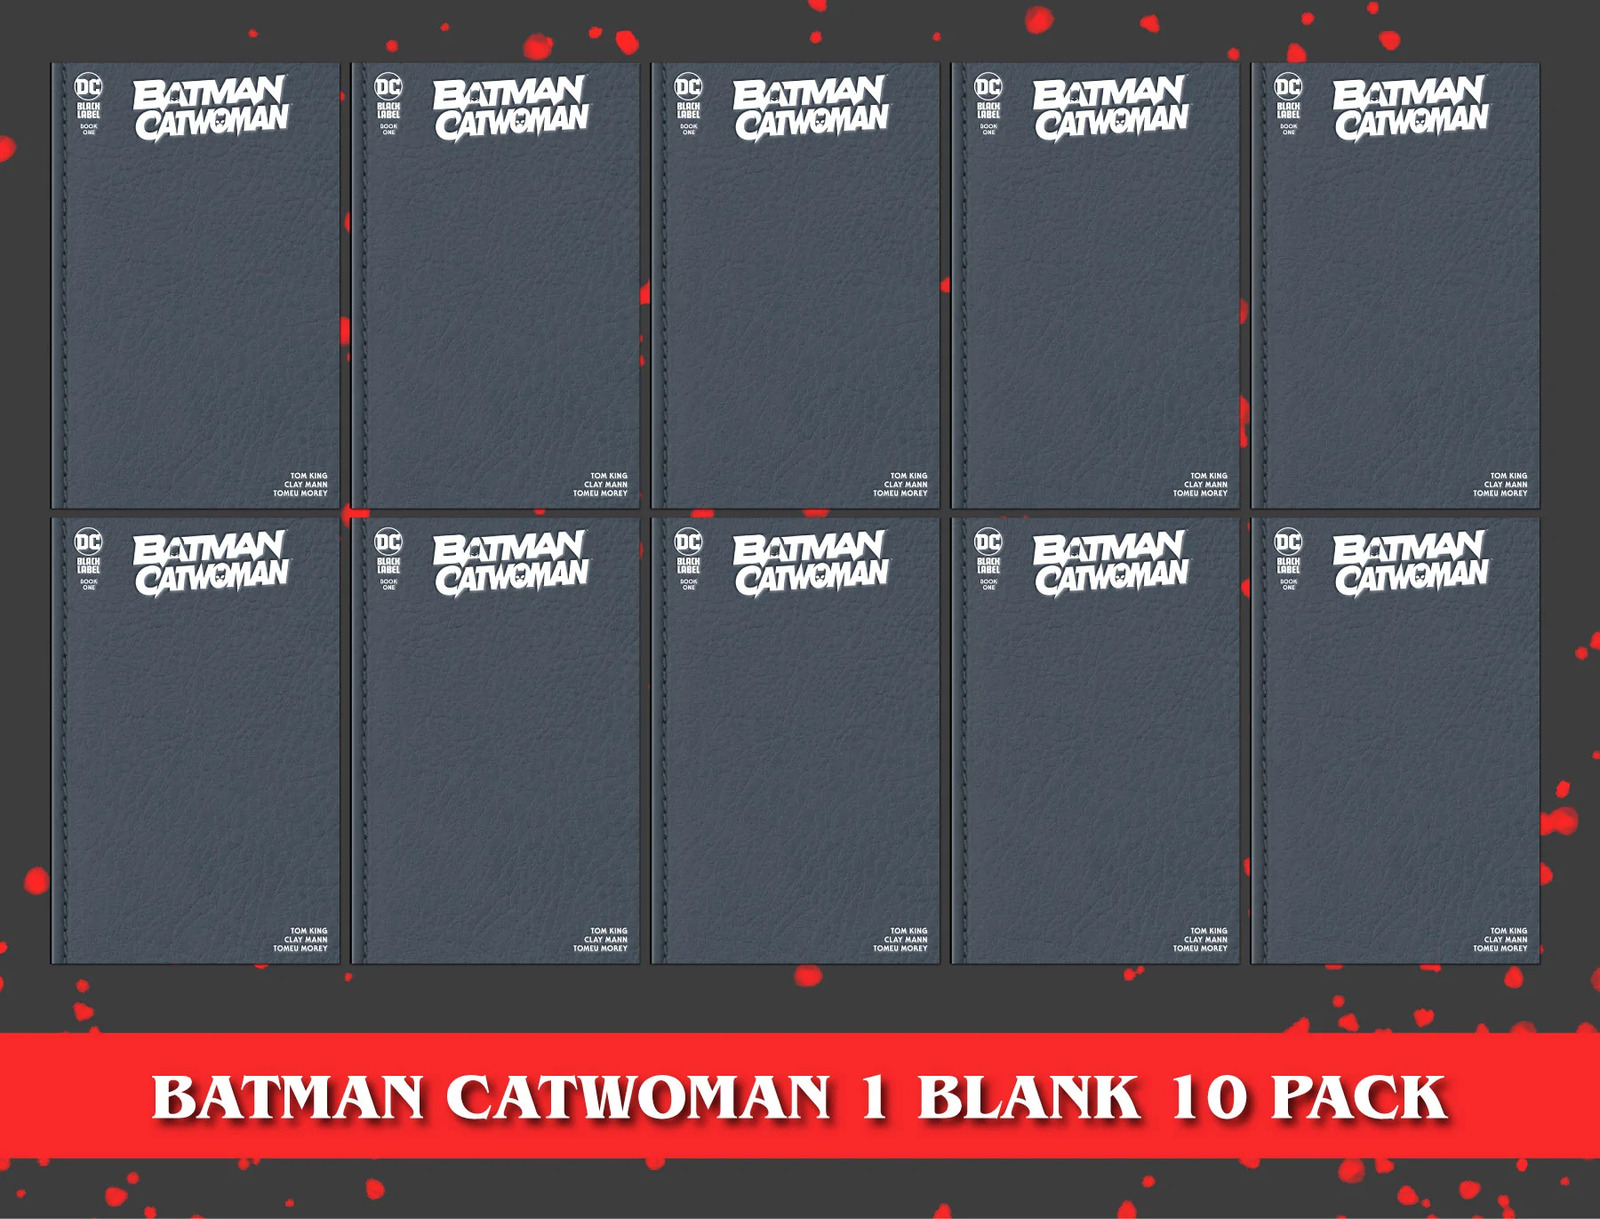 [10 PACK] BATMAN CATWOMAN #1 (OF 12) UNKNOWN COMICS BLANK EXCLUSIVE VAR (02/15/2